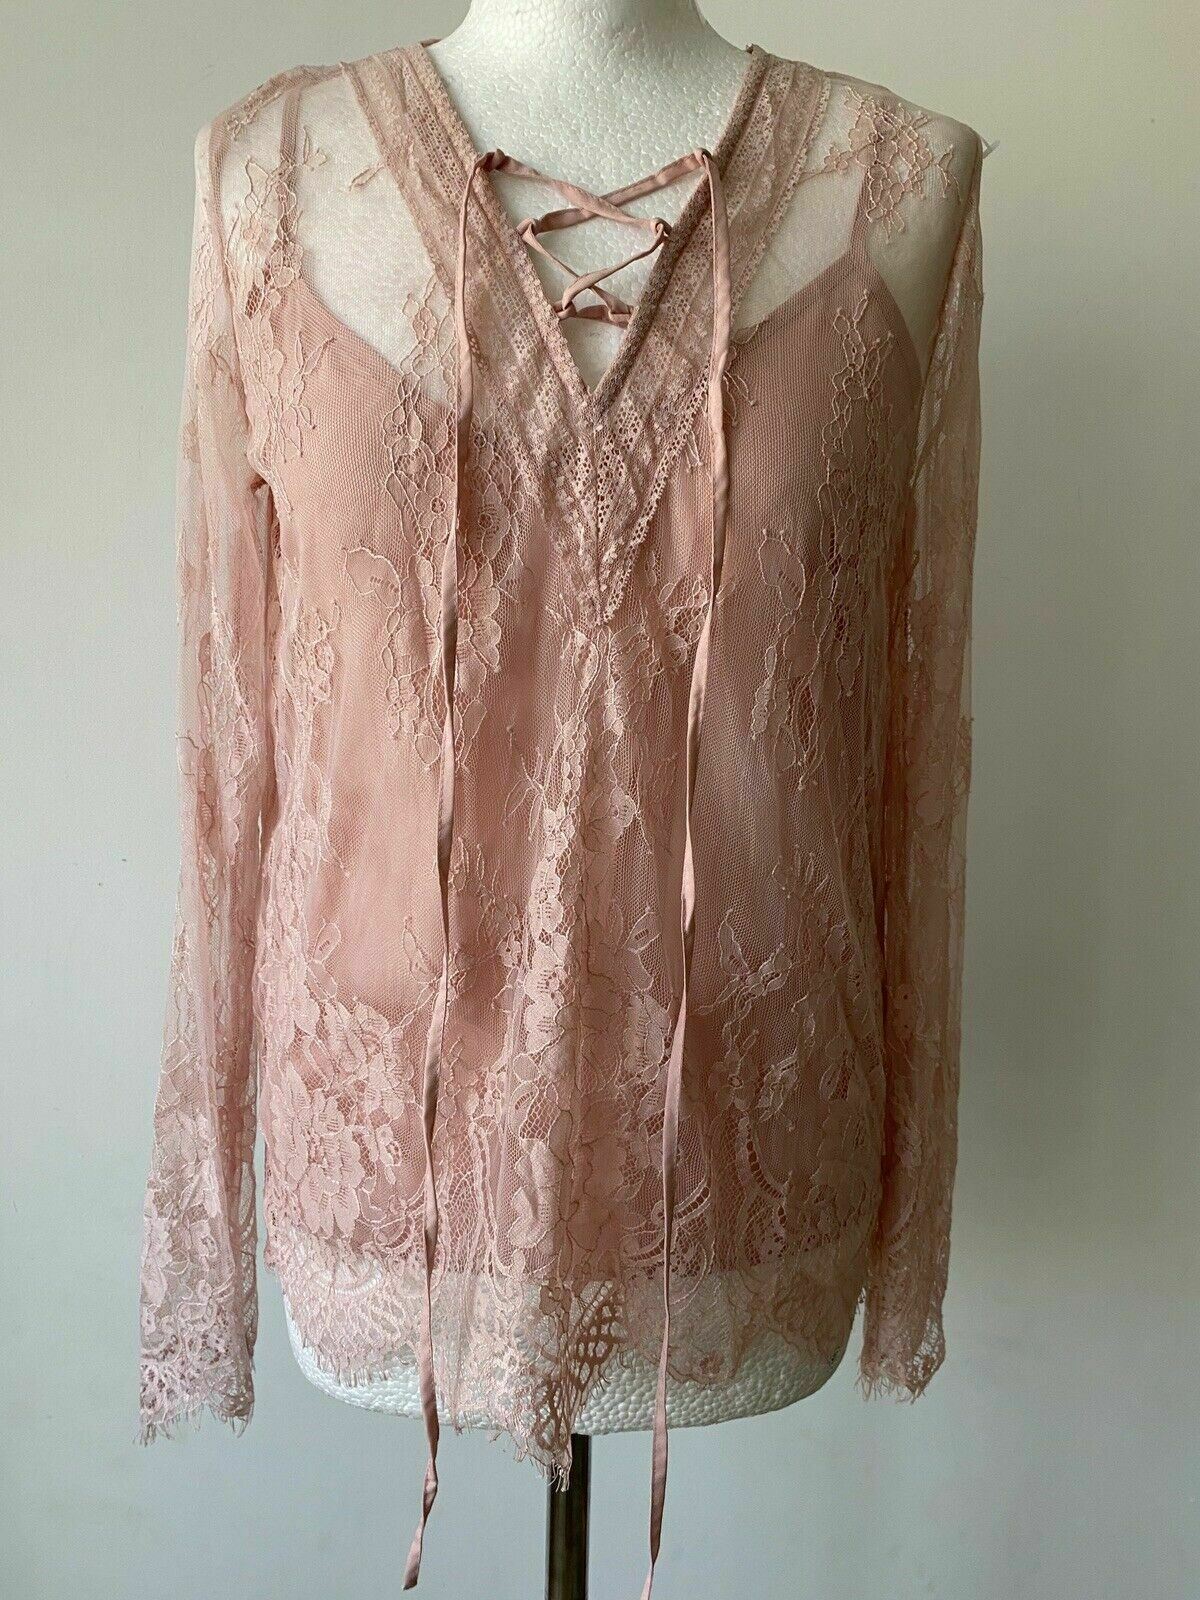 River Island Pink Lace Top With Attached Vest Size 8